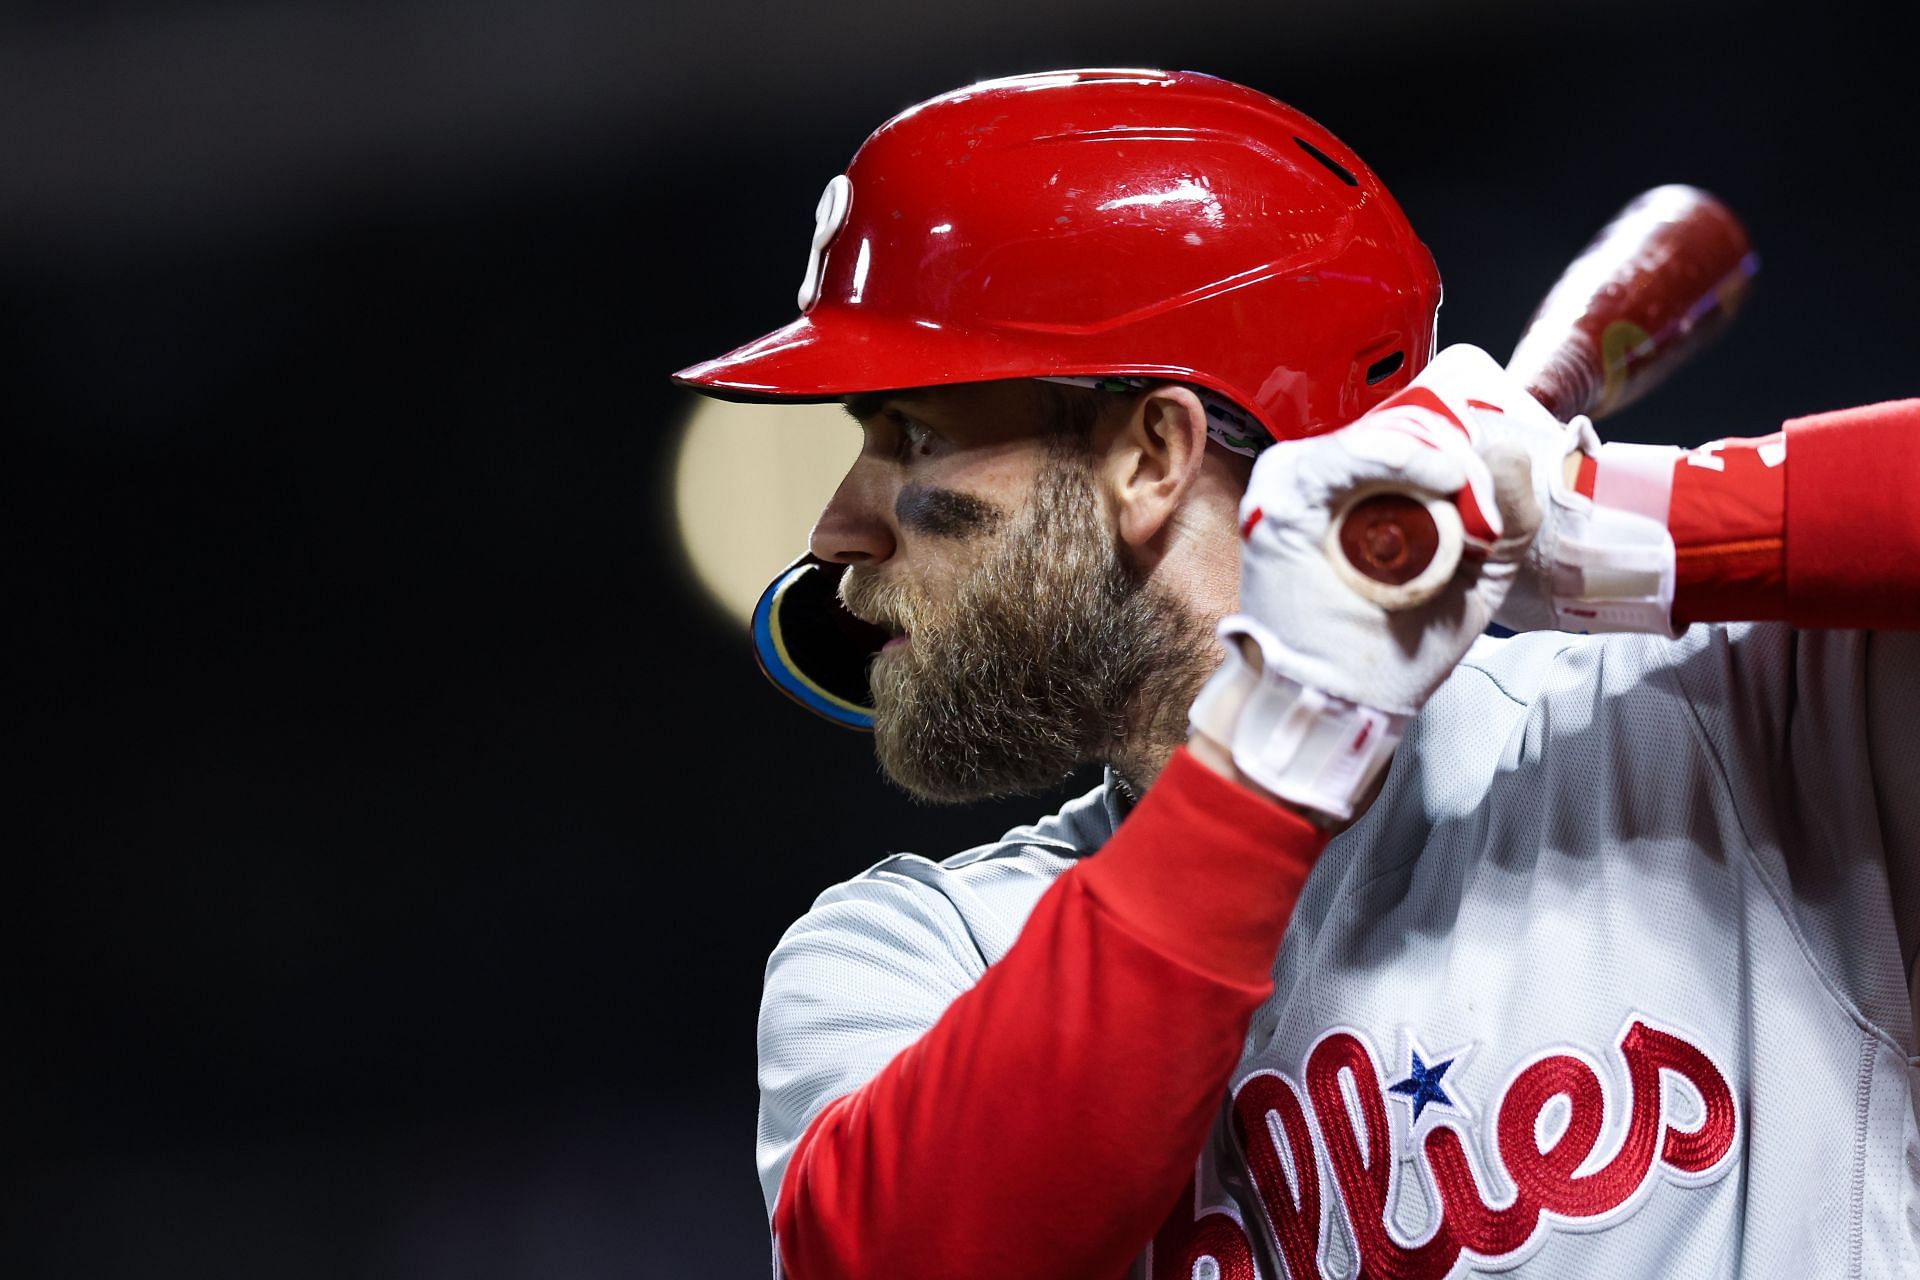 Bryce Harper is always ready to crush a baseball.